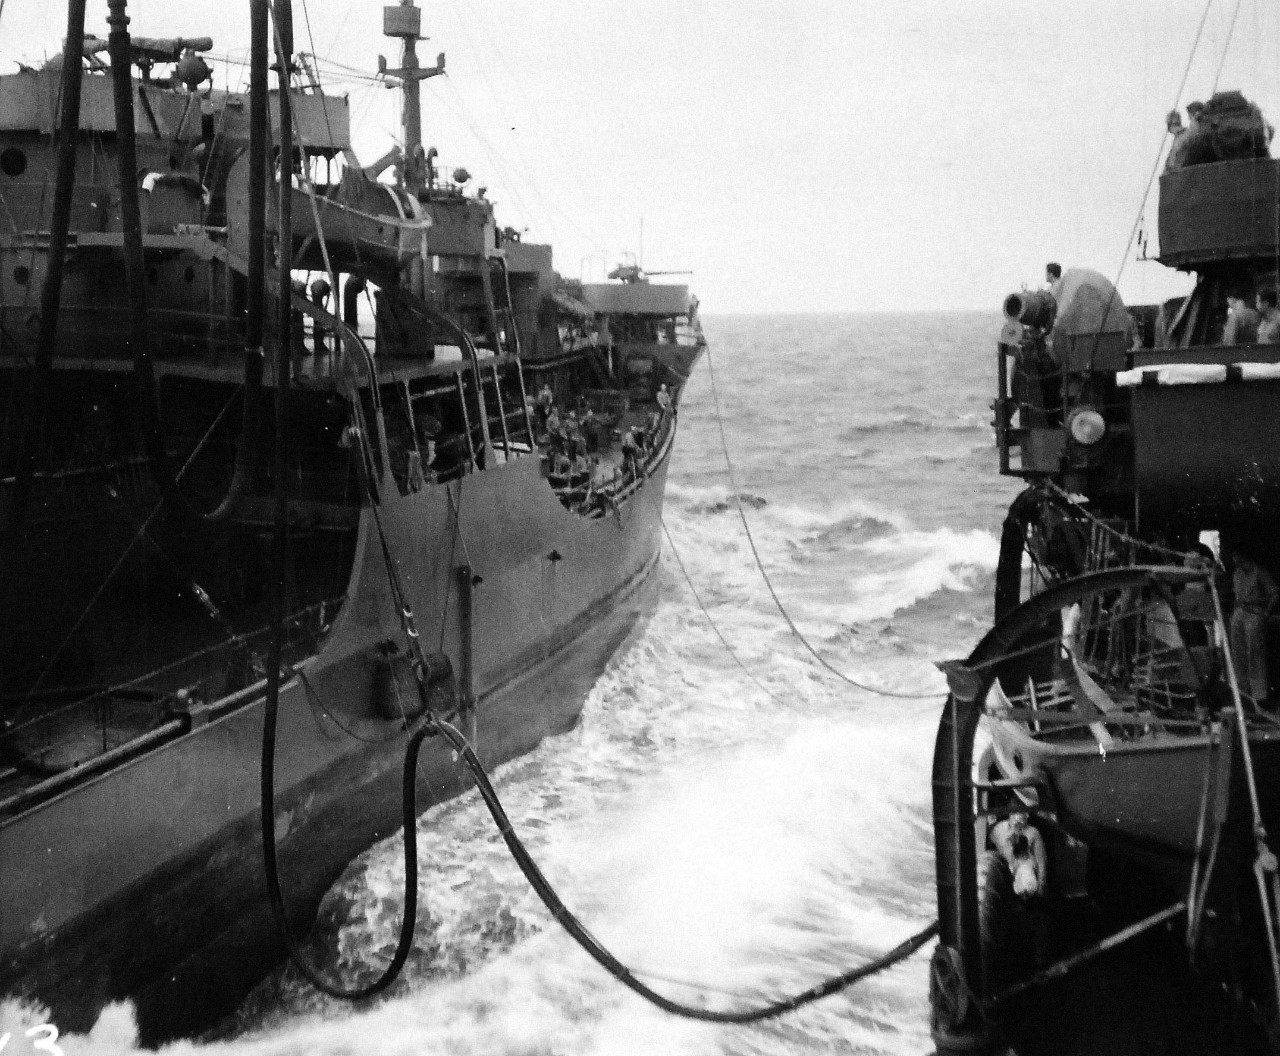 80-G-55505:  USS Sabine (AO-25) engaged in refueling operations underway in heavy seas during the Battle of Kula Gulf, 5-6 July 1943.   Photographed by CPU-2.    Official U.S. Navy Photograph, now in the collections of the National Archives.  (2015/4/28). 